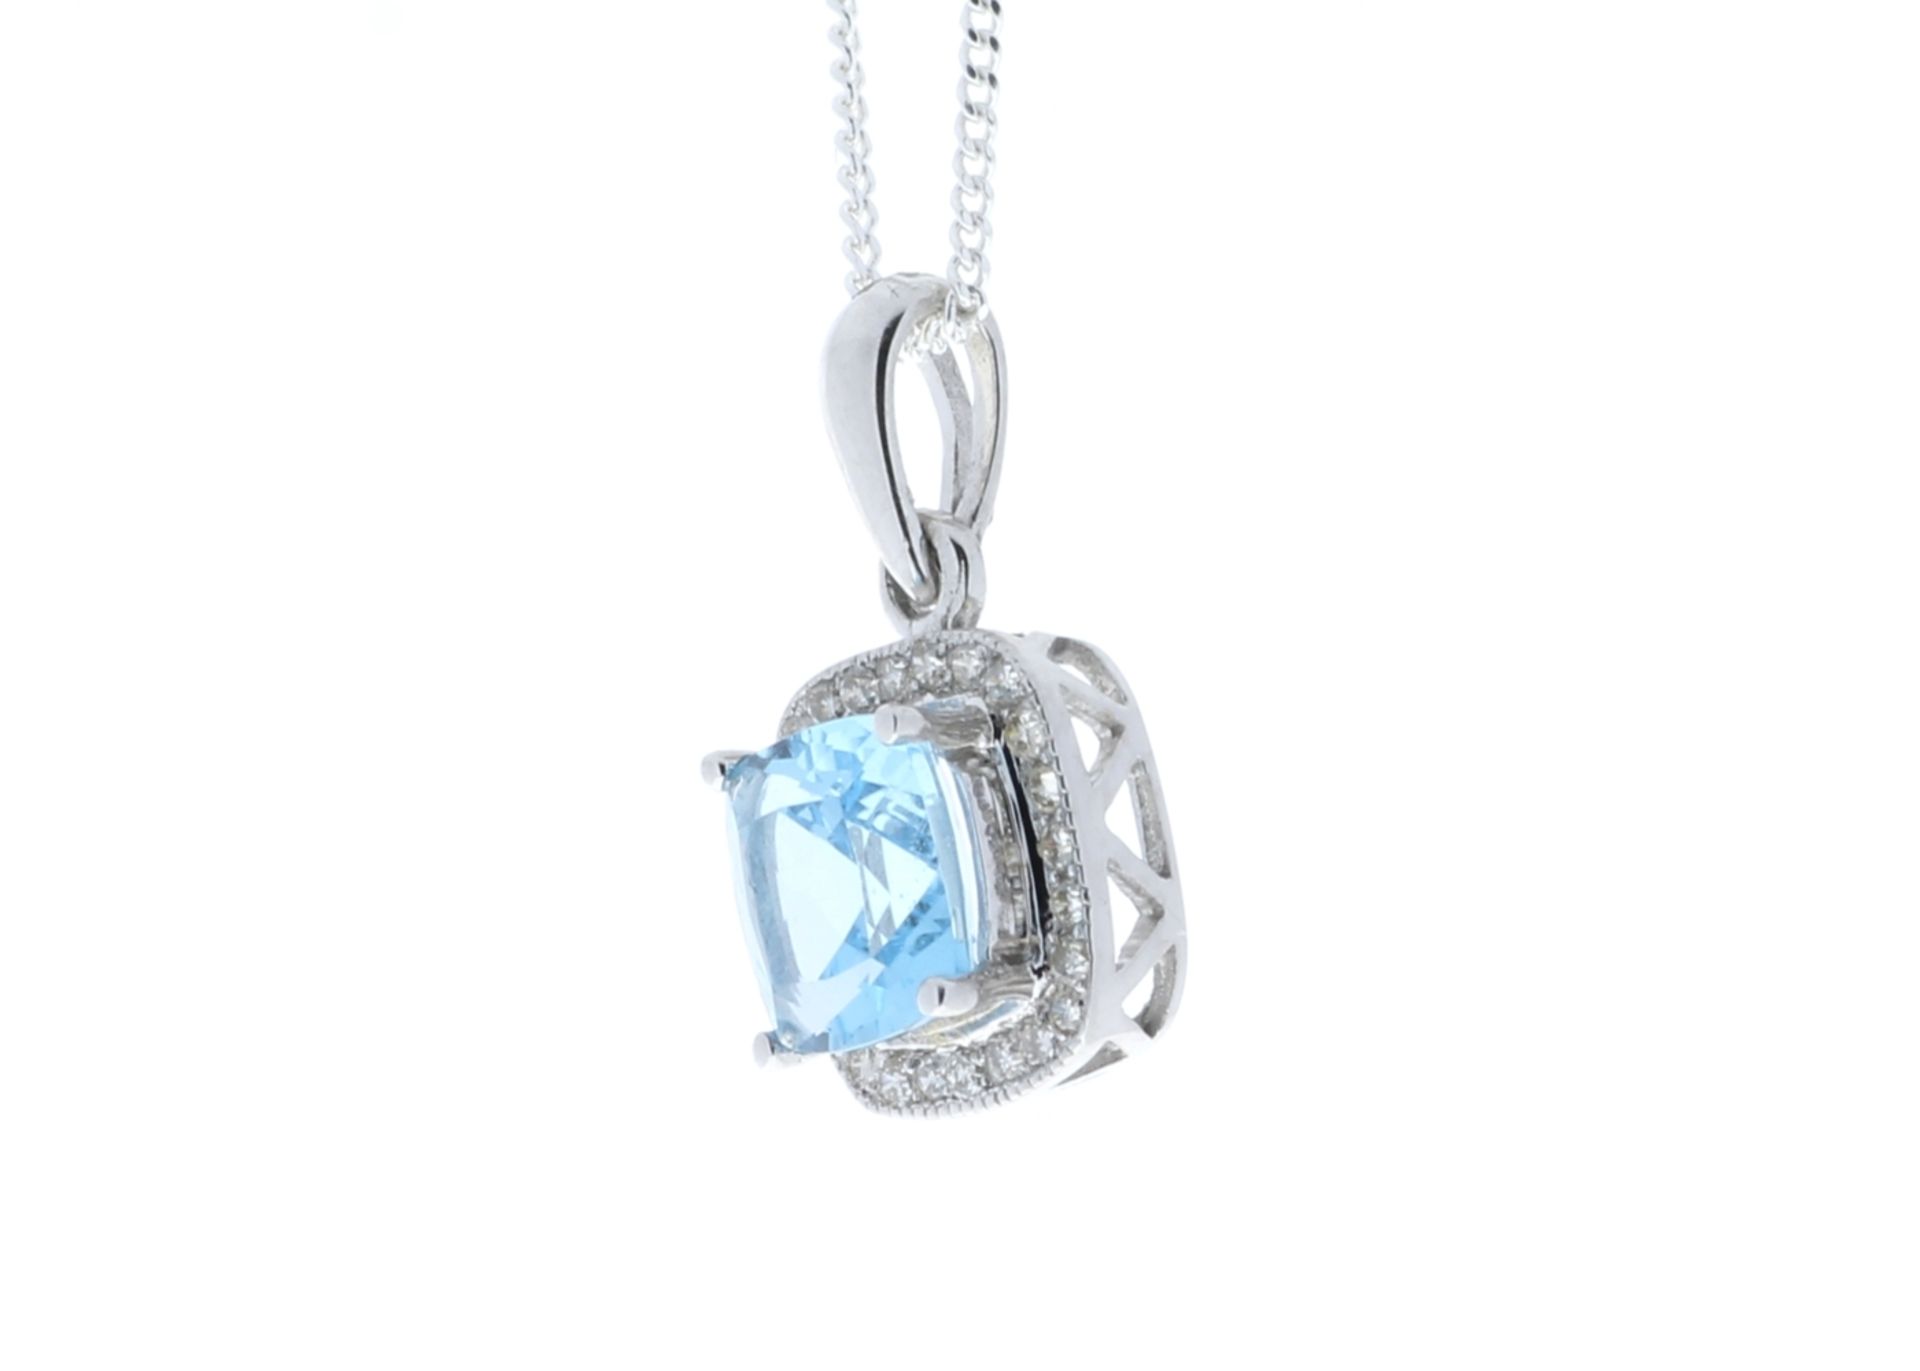 9ct White Gold Blue Topaz And Diamond Pendant 0.12 Carats - Valued by GIE £1,520.00 - 9ct White Gold - Image 4 of 5